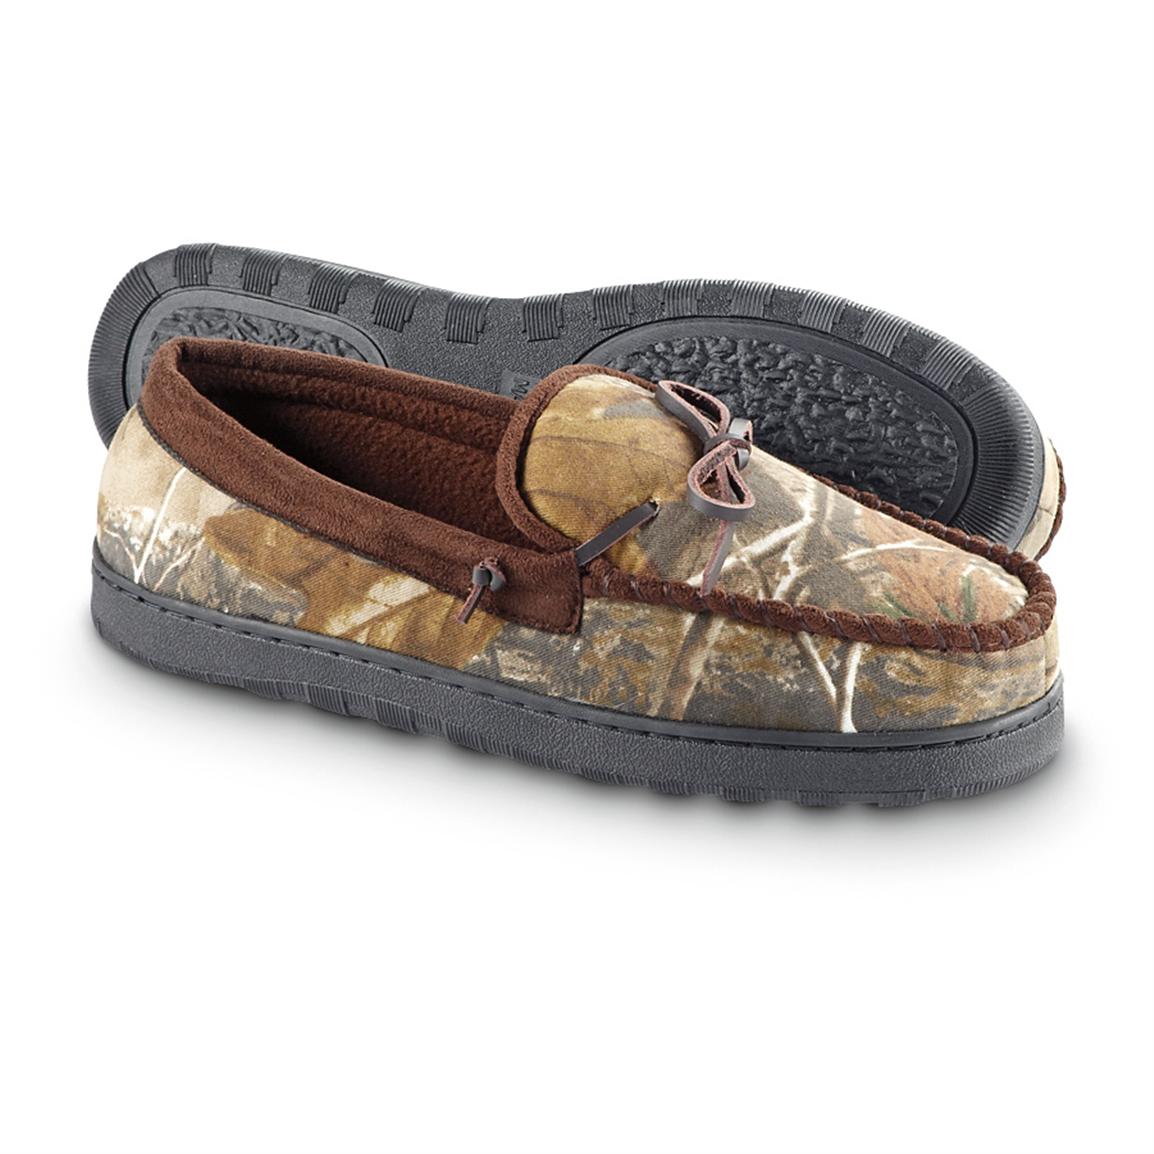 Guide Gear Men's Camo Moccasin Slippers, Realtree AP - 297659, Slippers ...